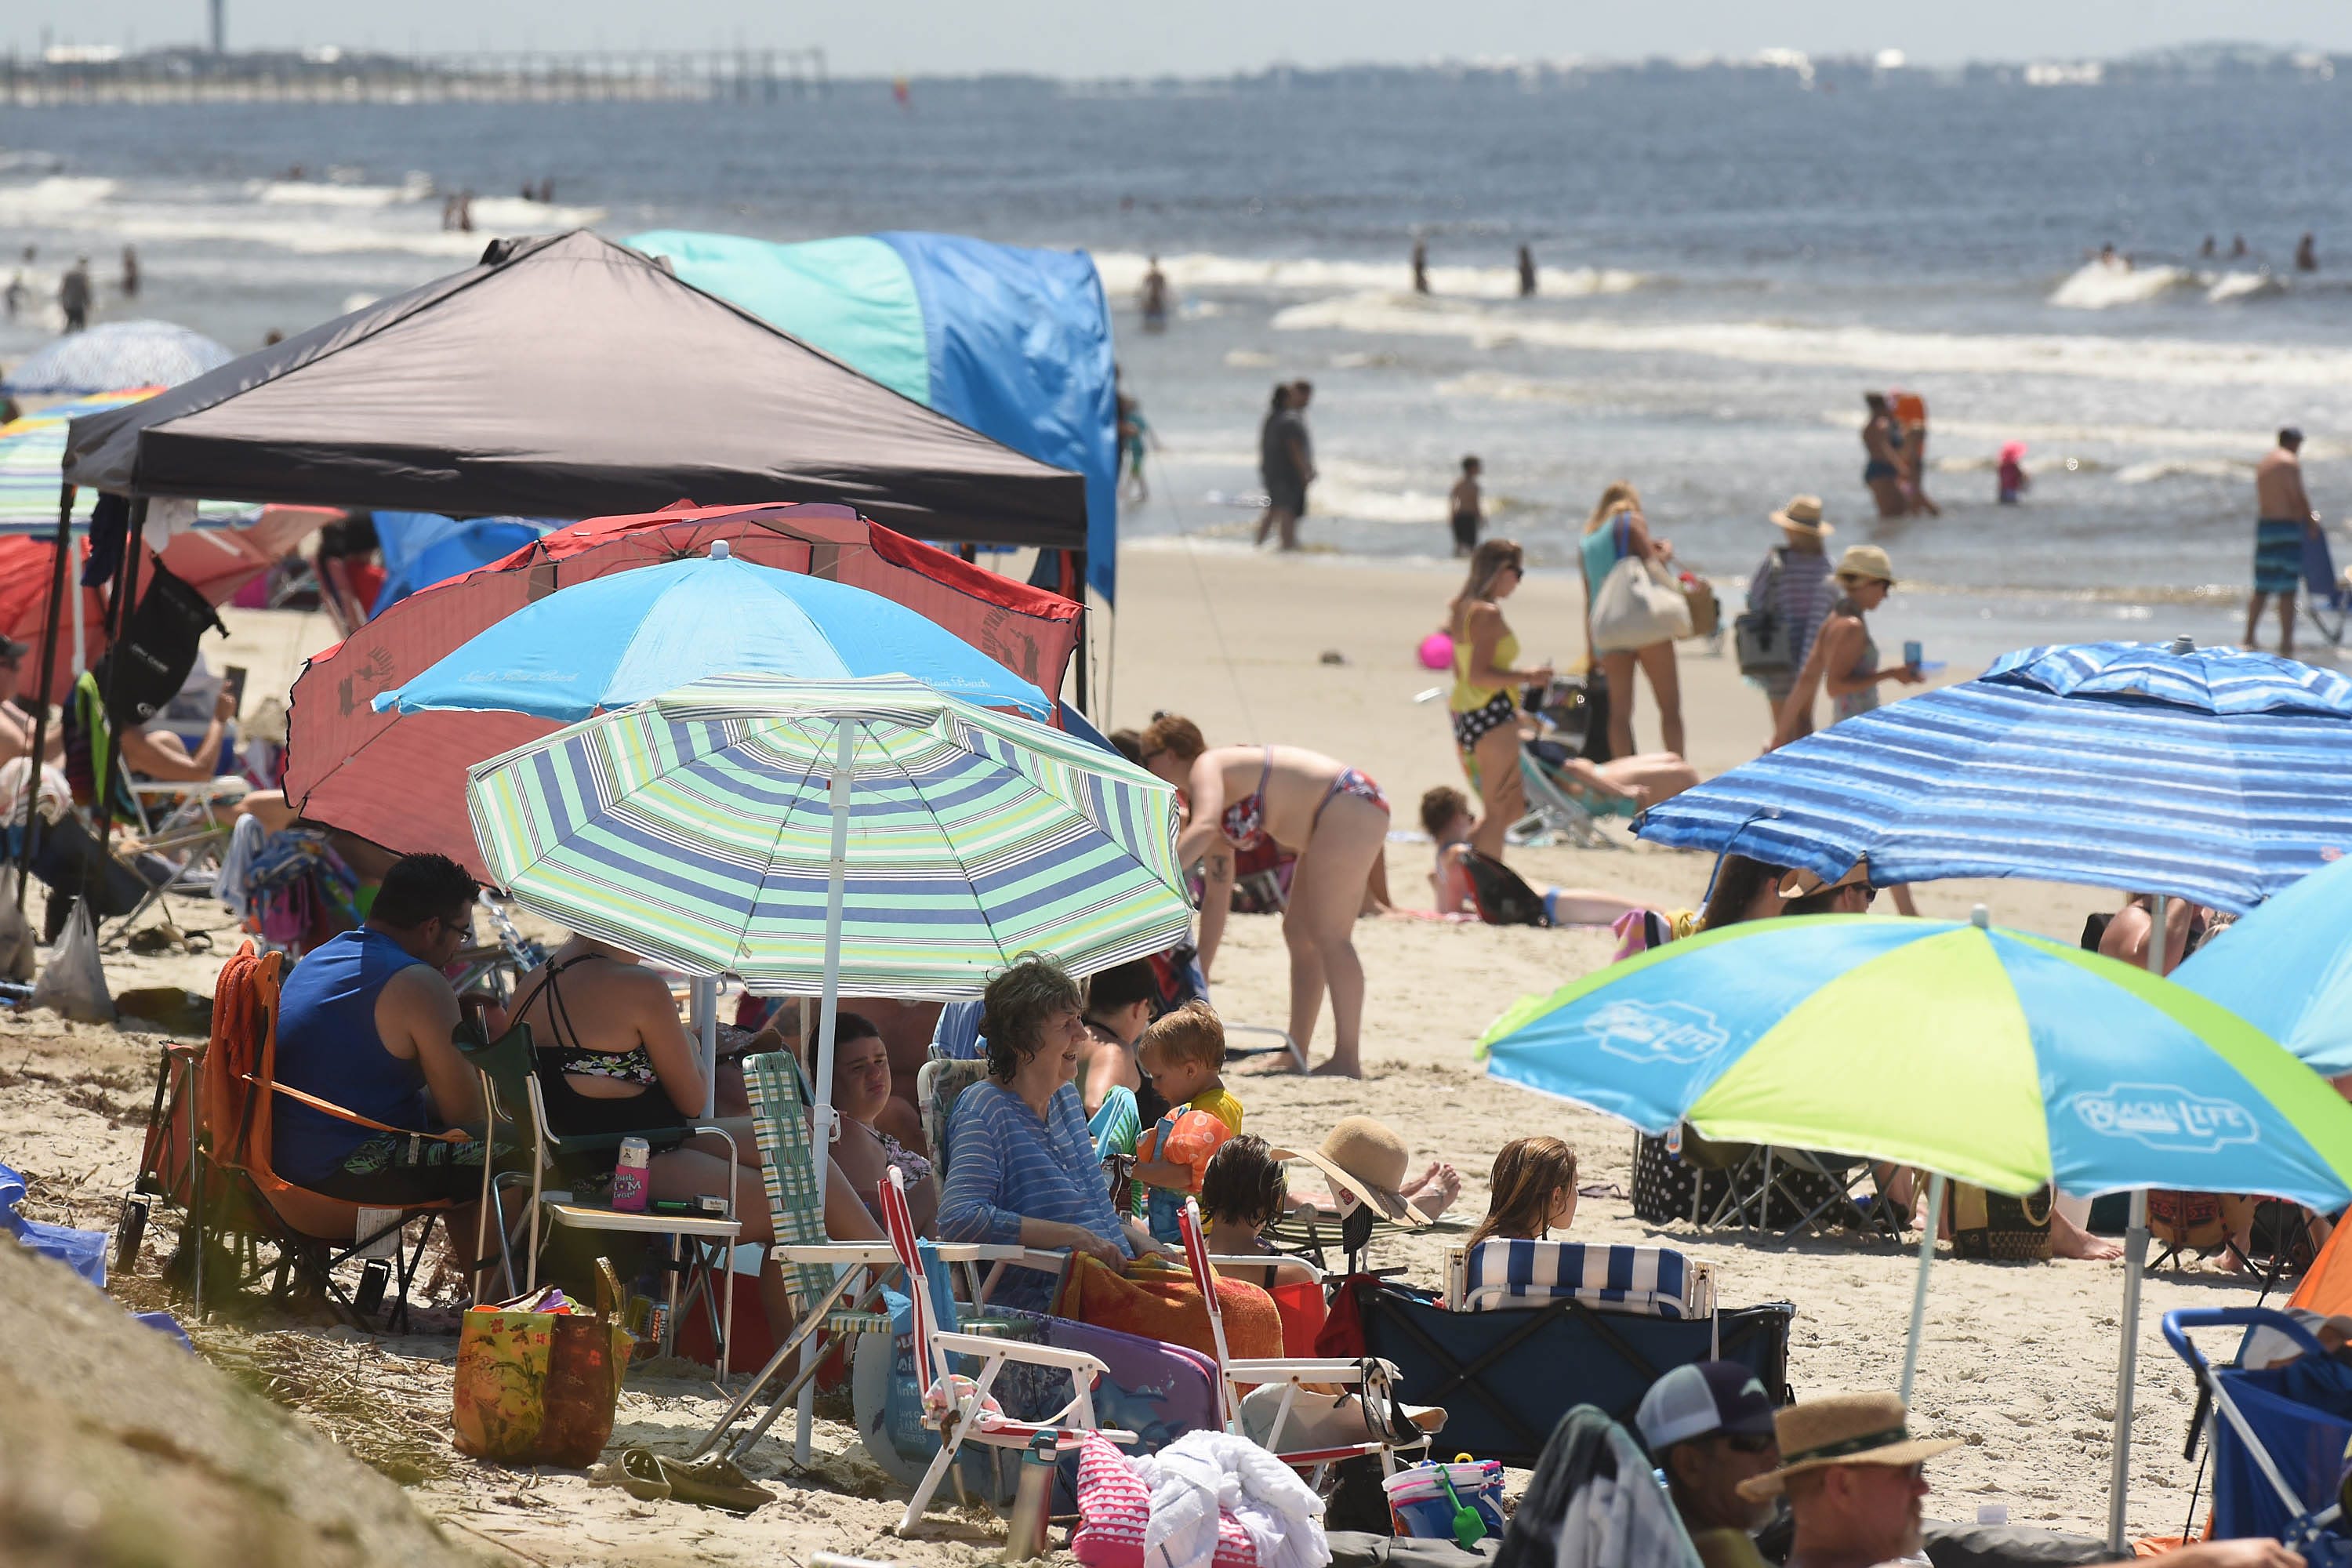 This Brunswick town has the best beach in North Carolina, according to a USA TODAY poll